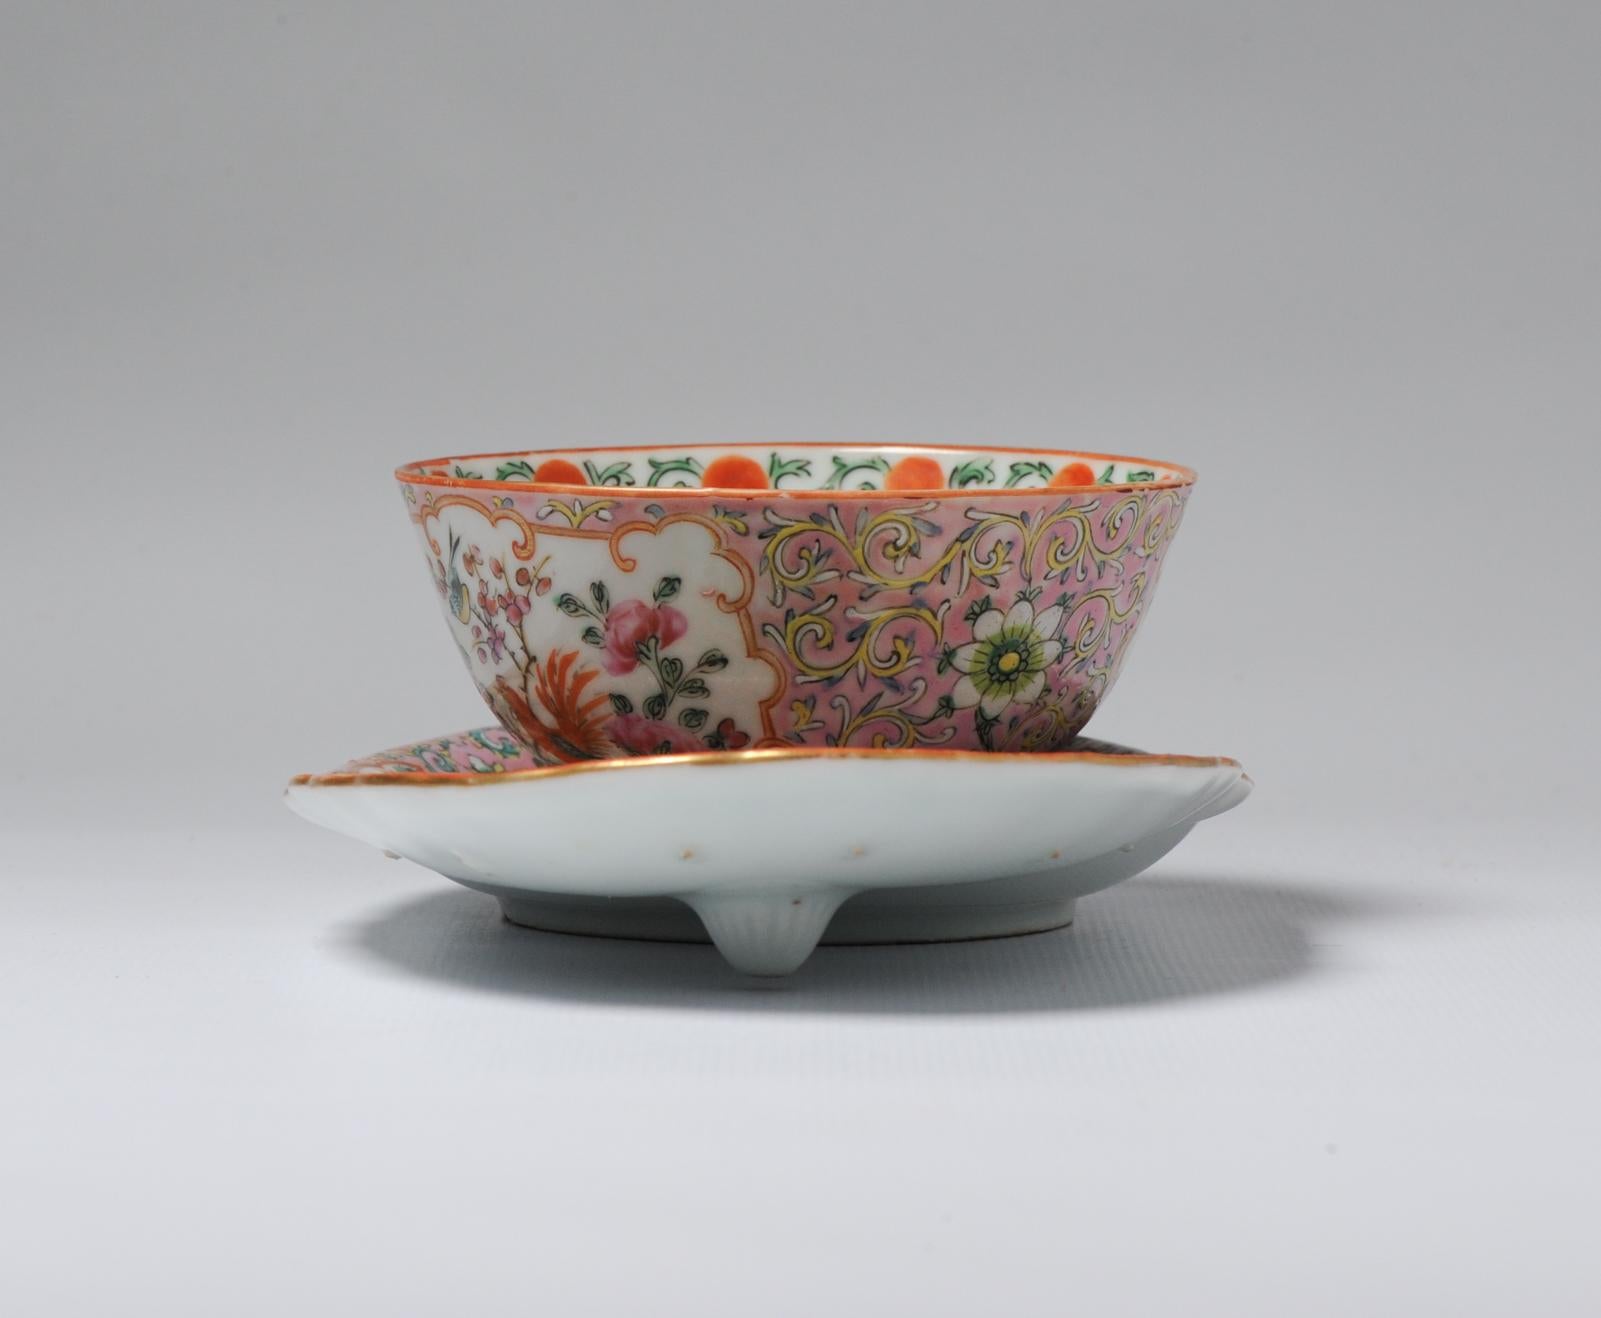 Antique Ice Bowl Sorbet Coupe Chinese Porcelain 19th Mandarin Rose China In Fair Condition For Sale In Amsterdam, Noord Holland